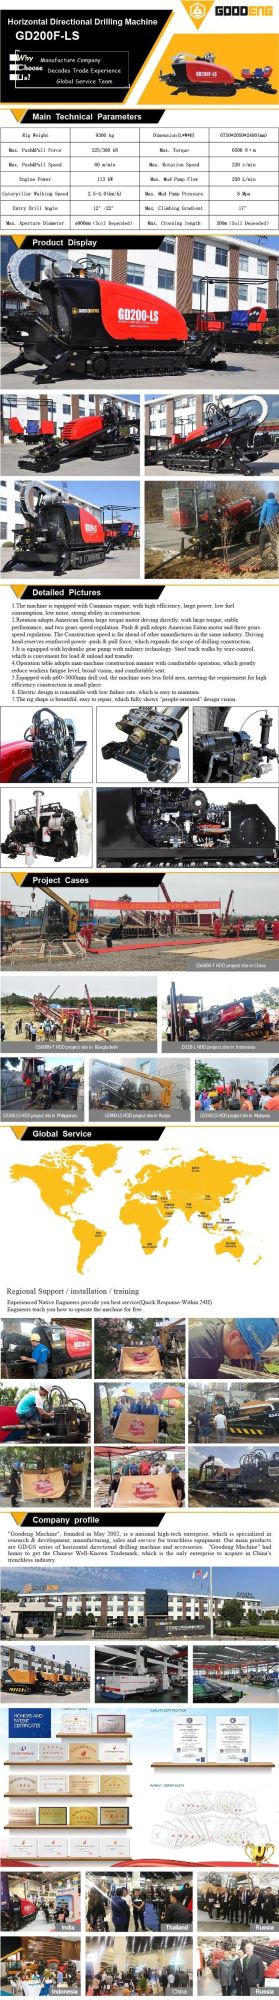 GD200F-LS trenchless rig for conduit/gas/cable pipe laying